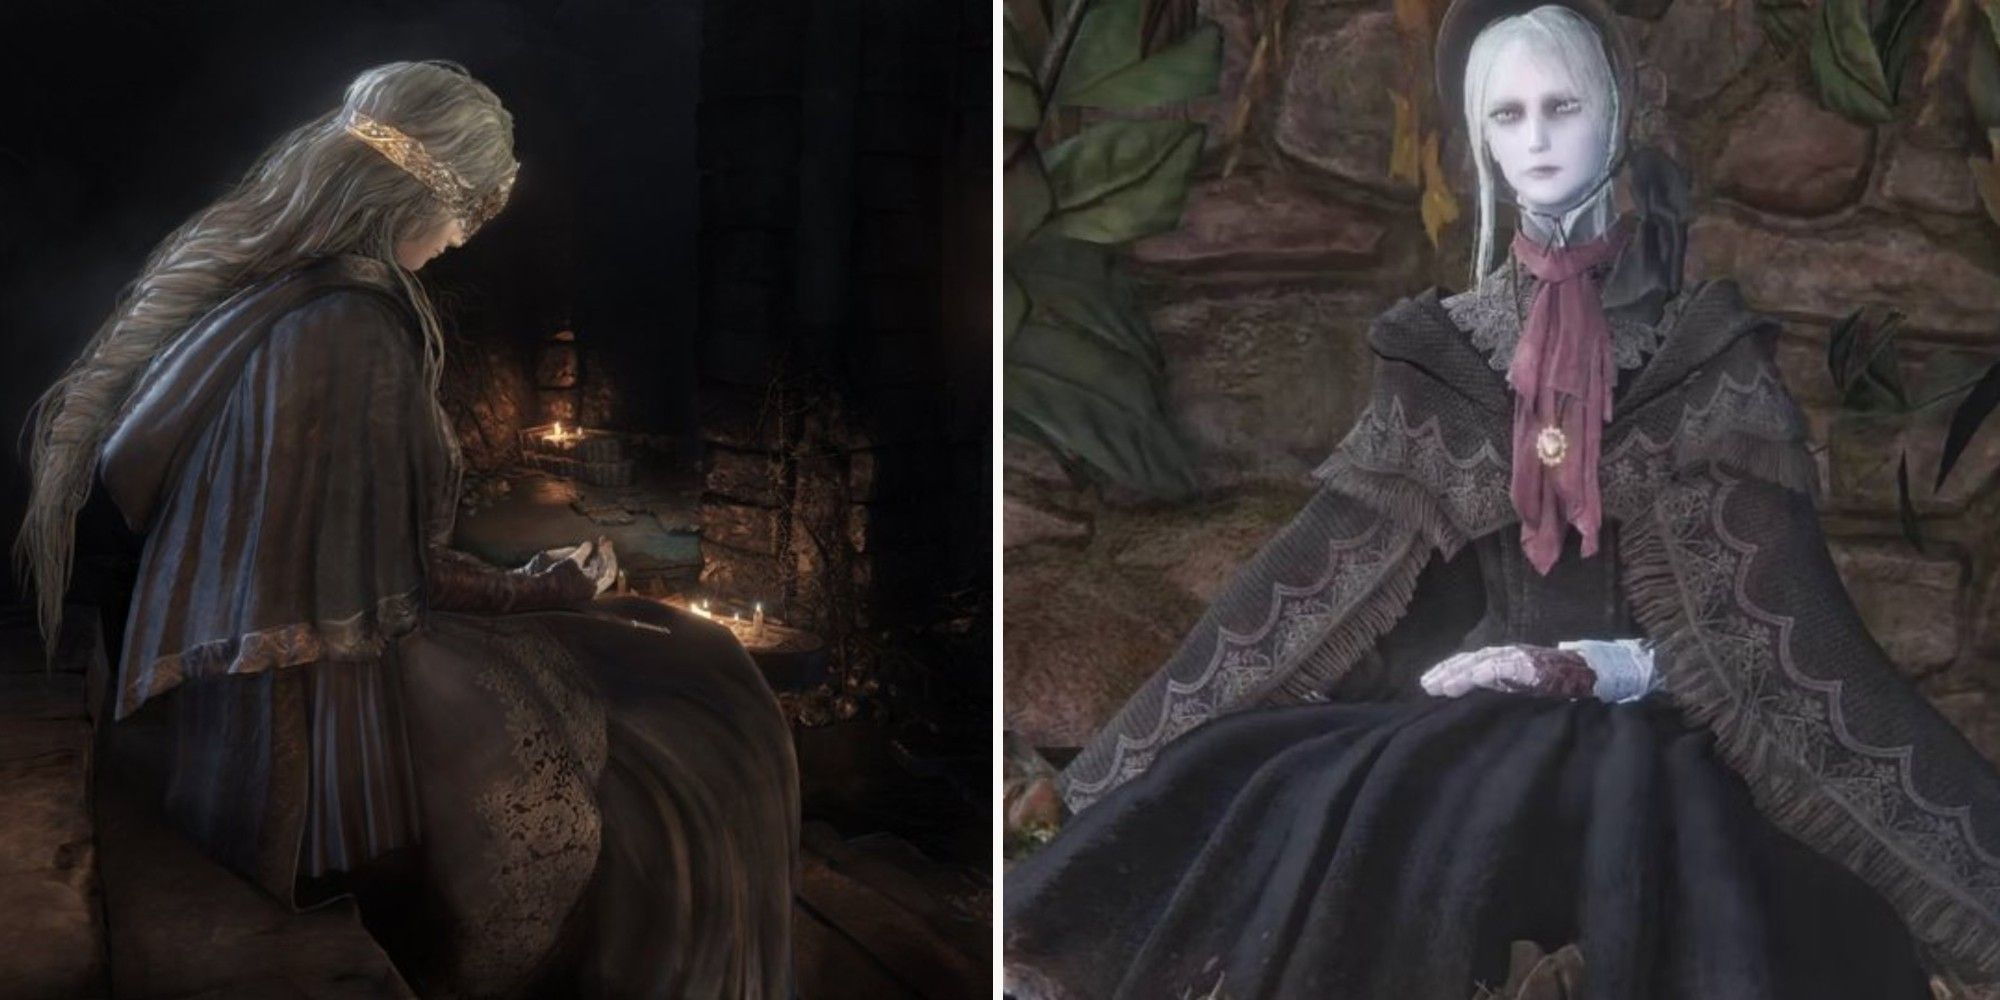 The Fire Keeepr and Doll from Dark Souls 3 and Bloodborne video games respectfully, sitting in contemplation